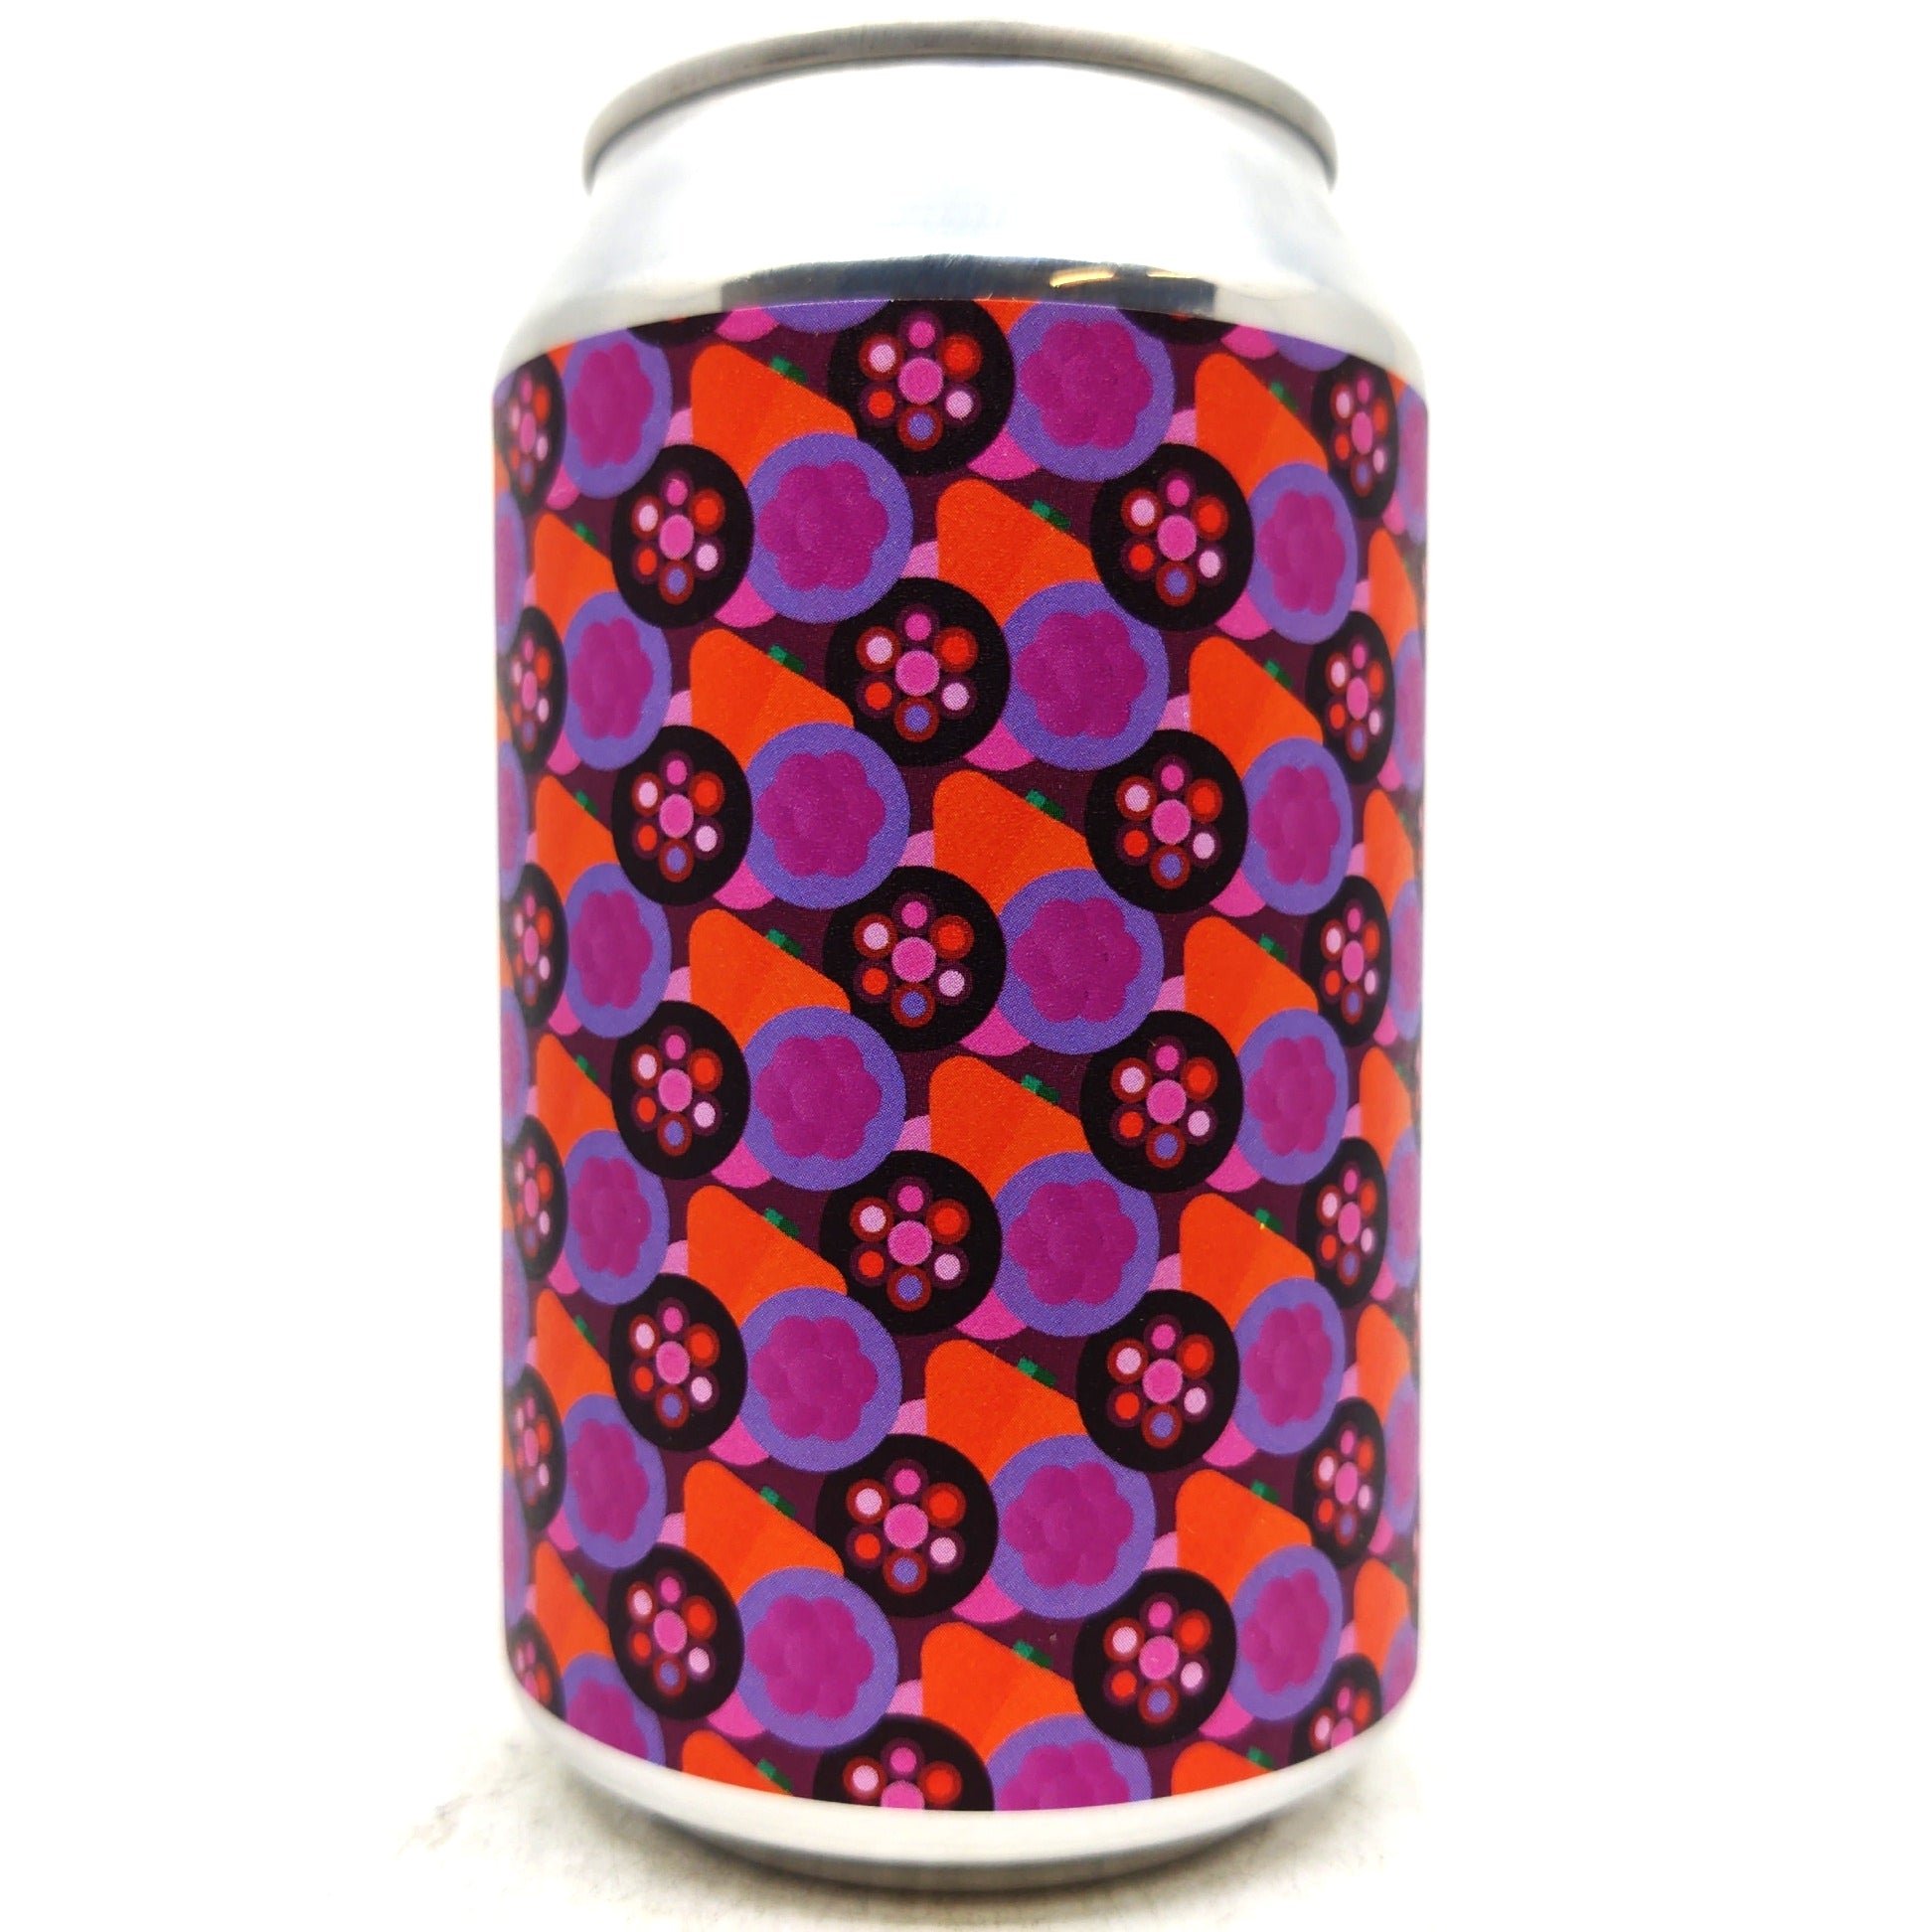 Brick Brewery Triple Fruited Fruits of the Forest Sour 3.4% (330ml can)-Hop Burns & Black